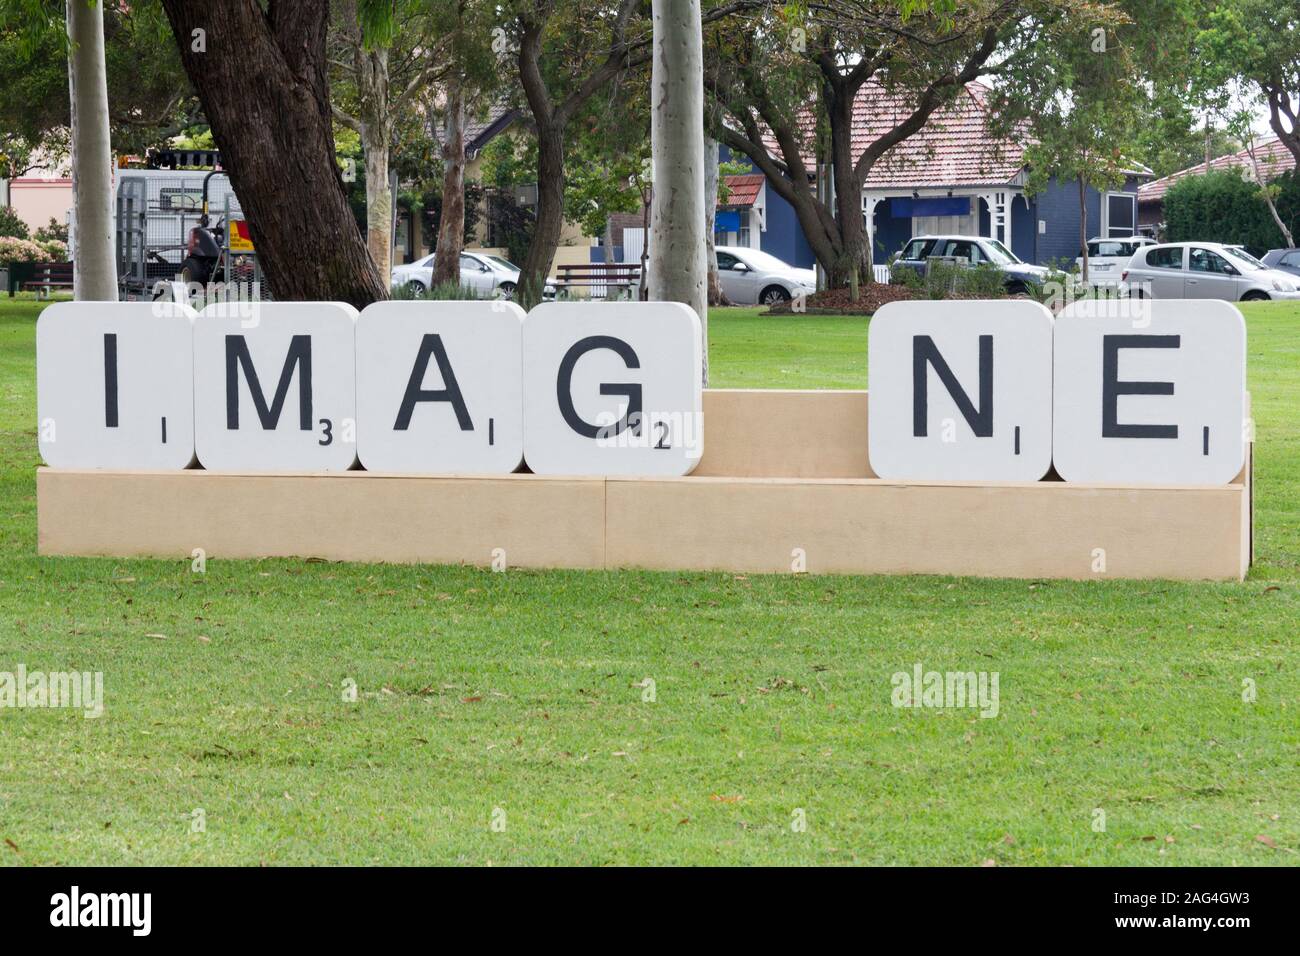 Large scrabble letters forming the word Imagine in a park, Sydney,Australia Stock Photo